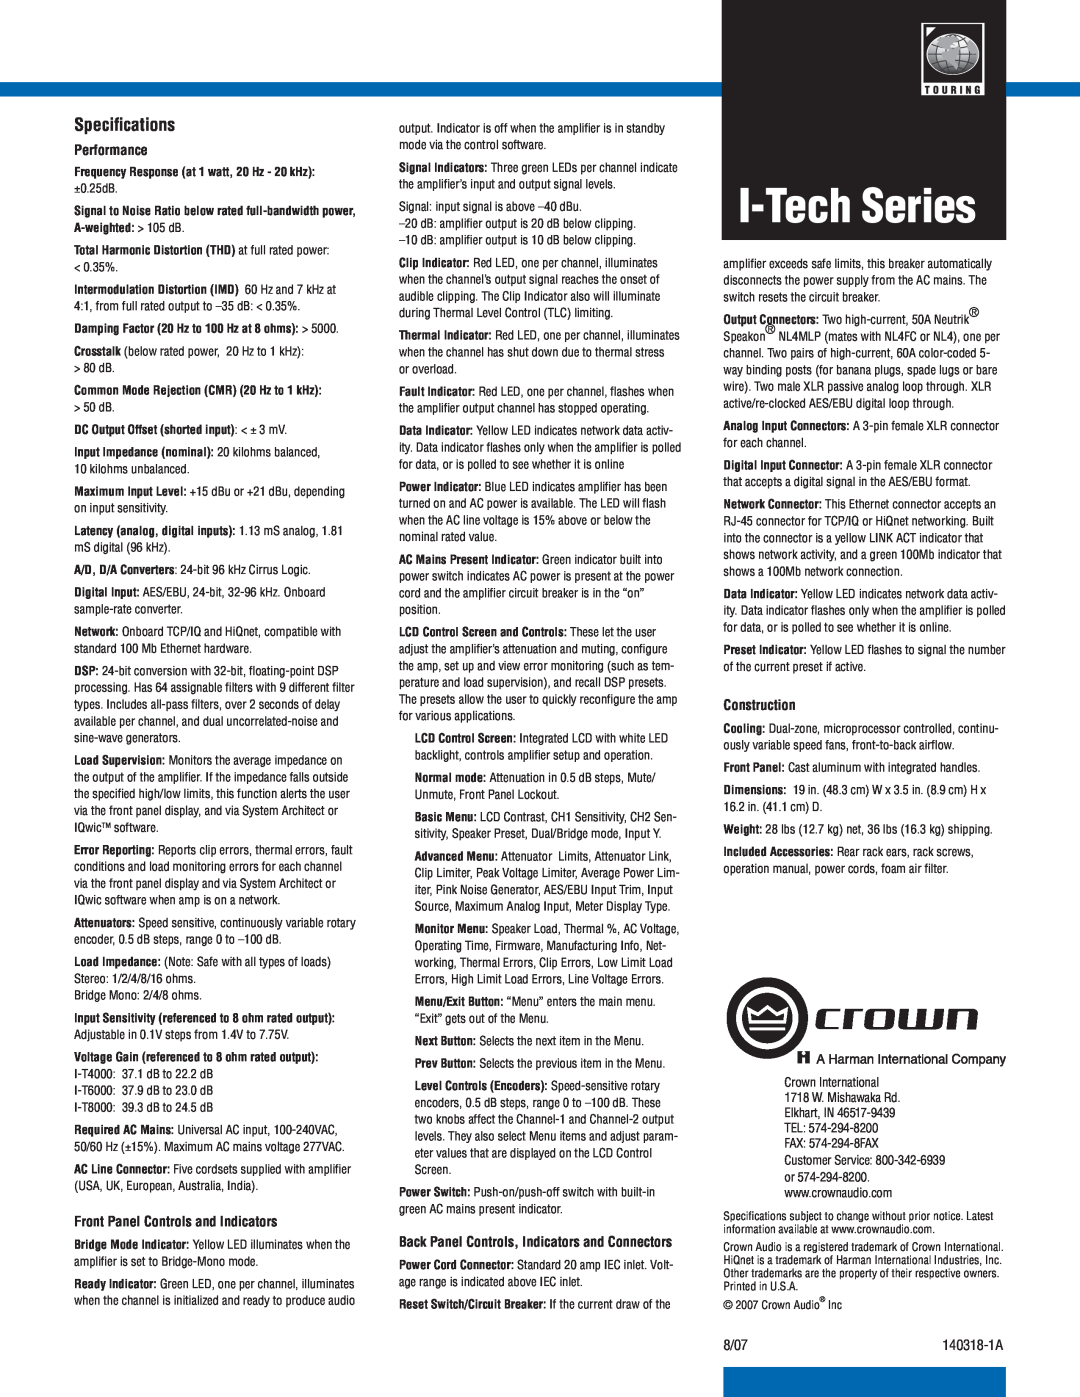 Crown Audio I-TECH 6000 manual I-TechSeries, Speciﬁcations, Performance, Front Panel Controls and Indicators, Construction 